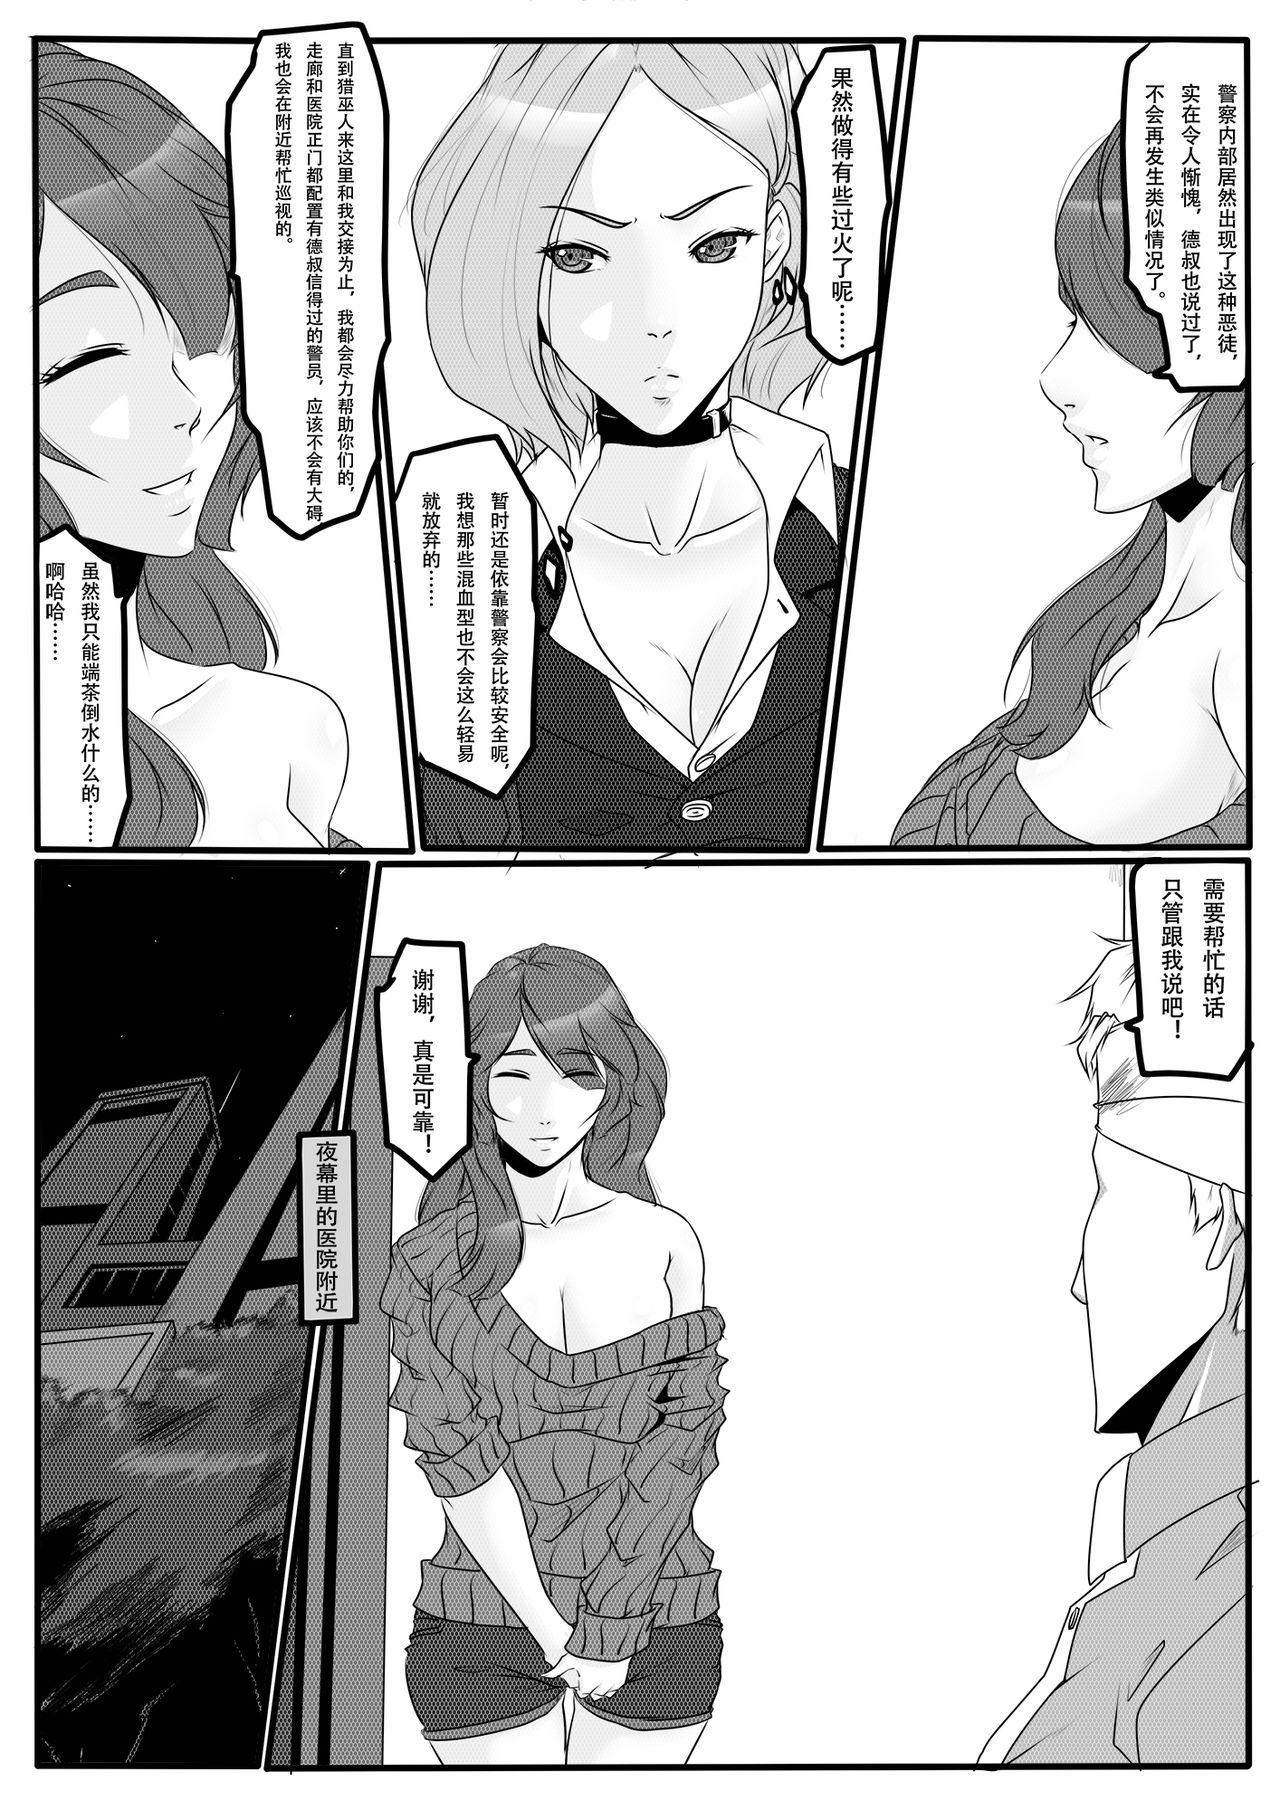 Holes 天都WItch 第二幕 Insertion - Page 6